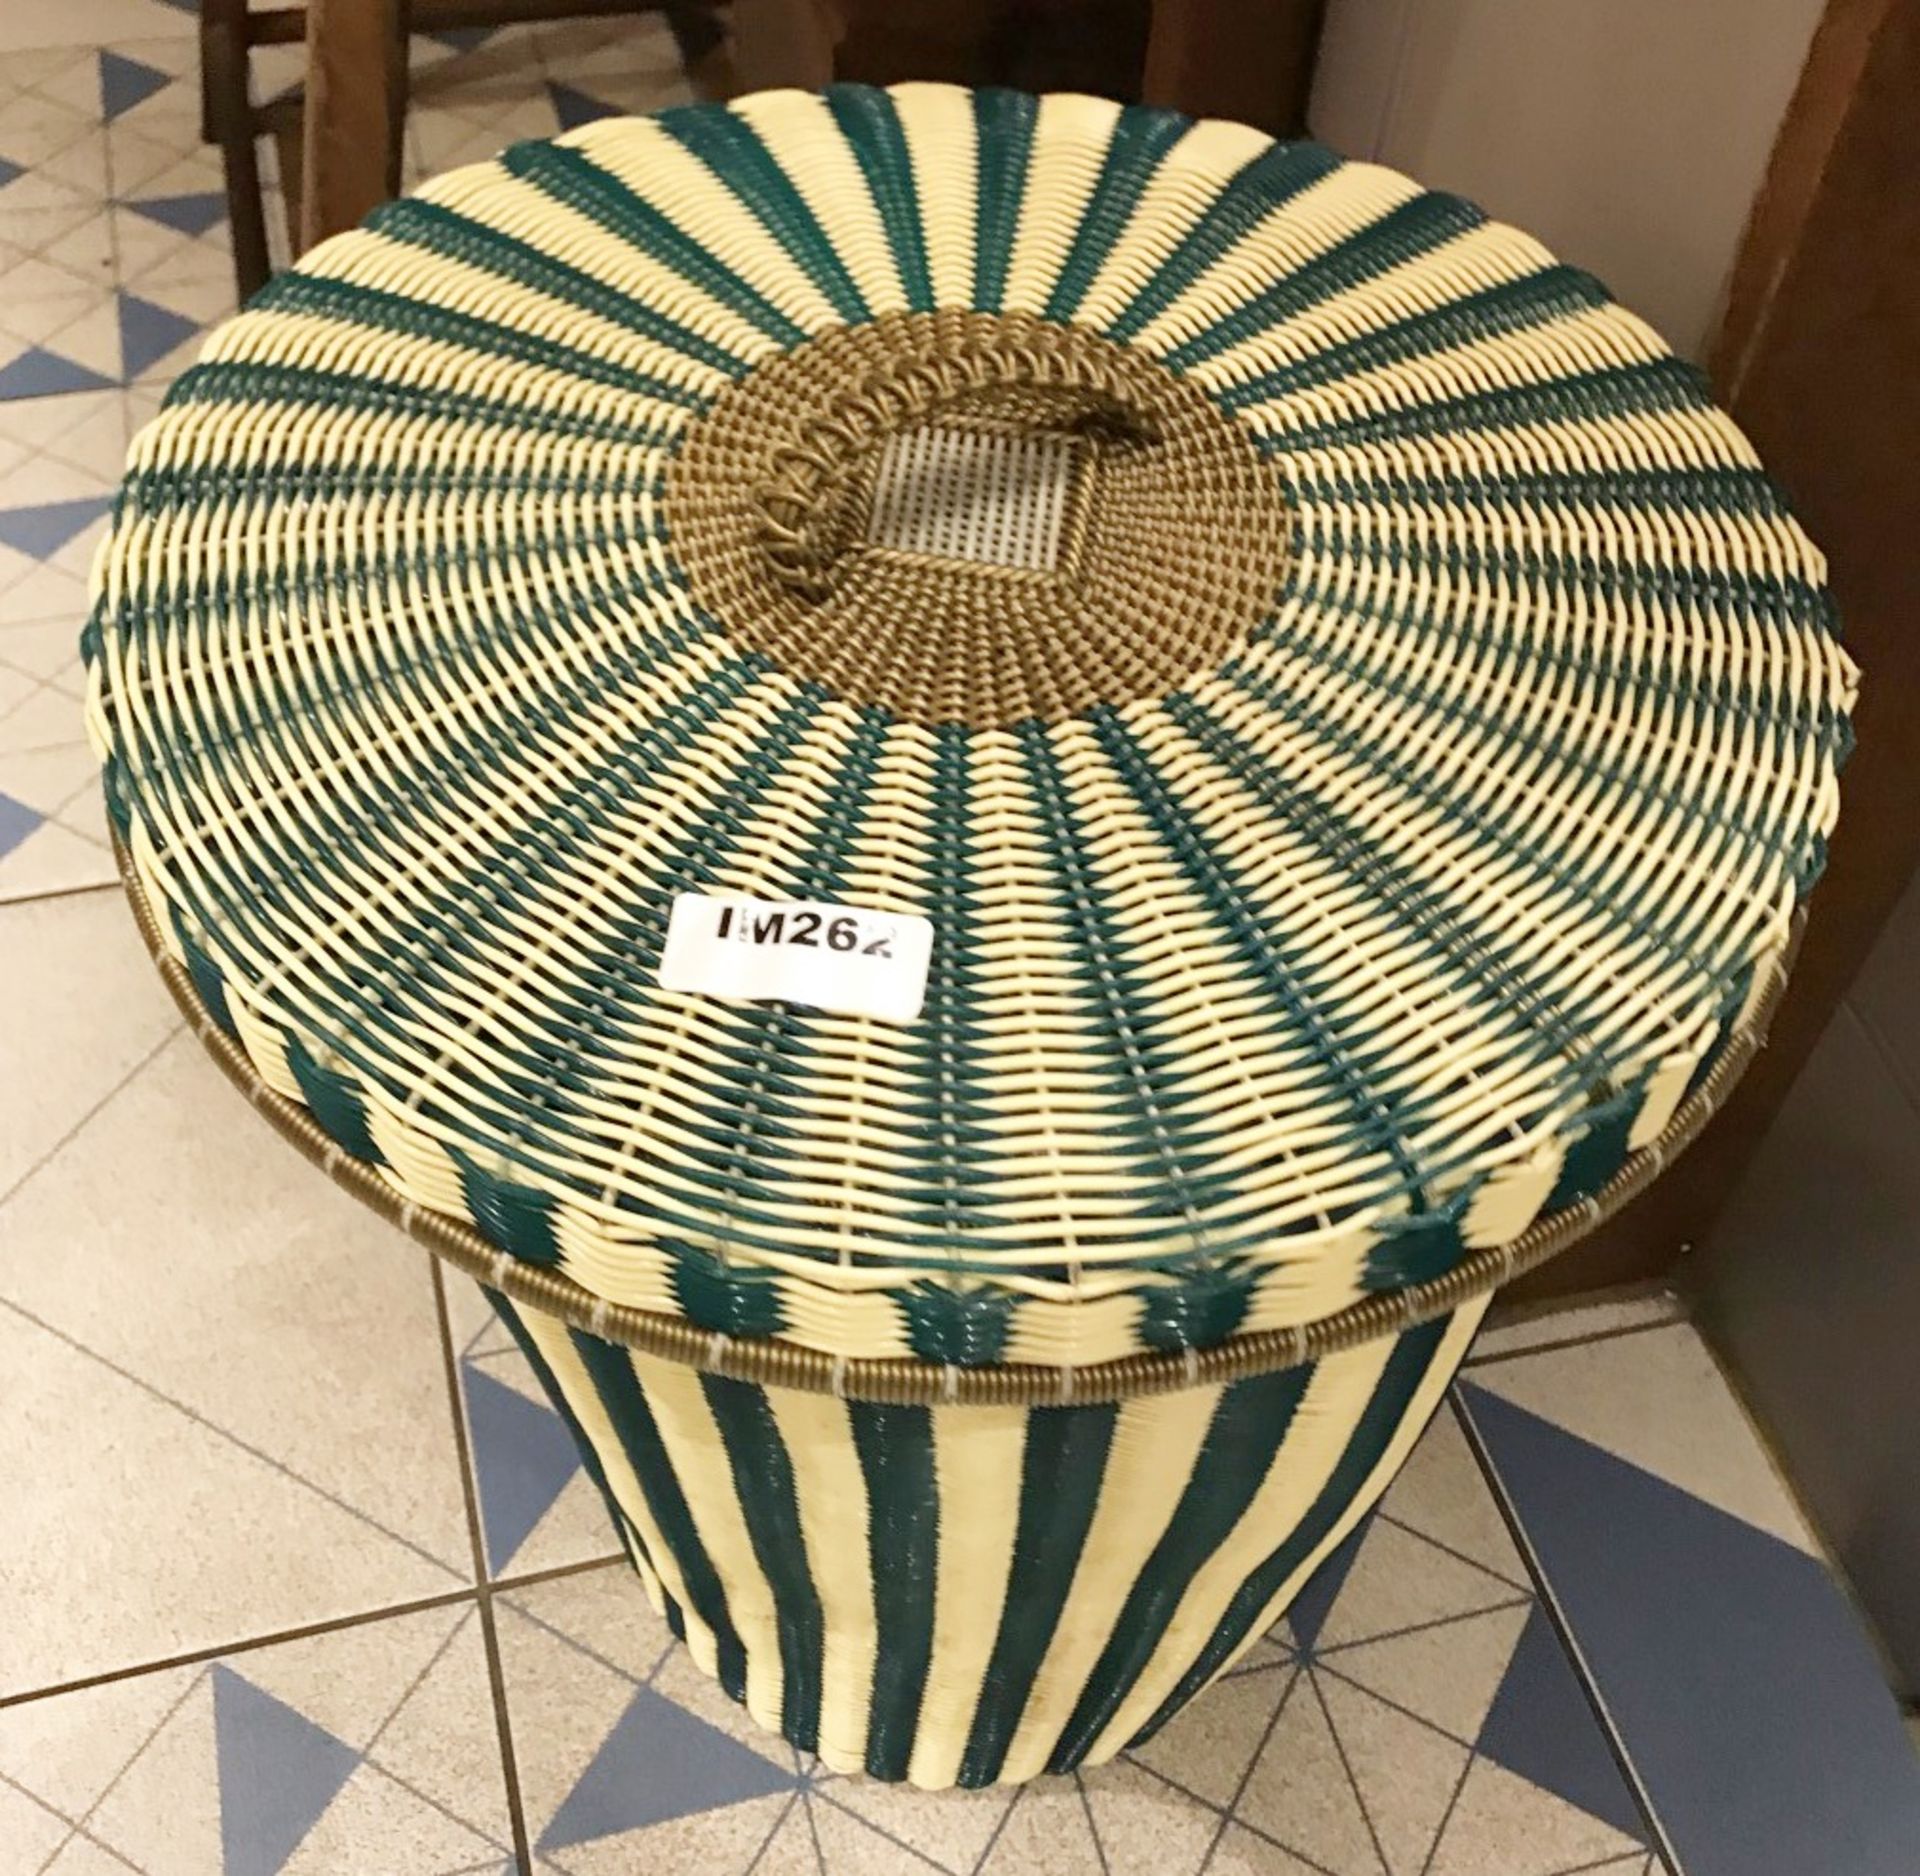 1 x Decorative Woven Basket With Lid in Green and Yellow - CL554 - Ref IM262 - Location: - Image 2 of 2